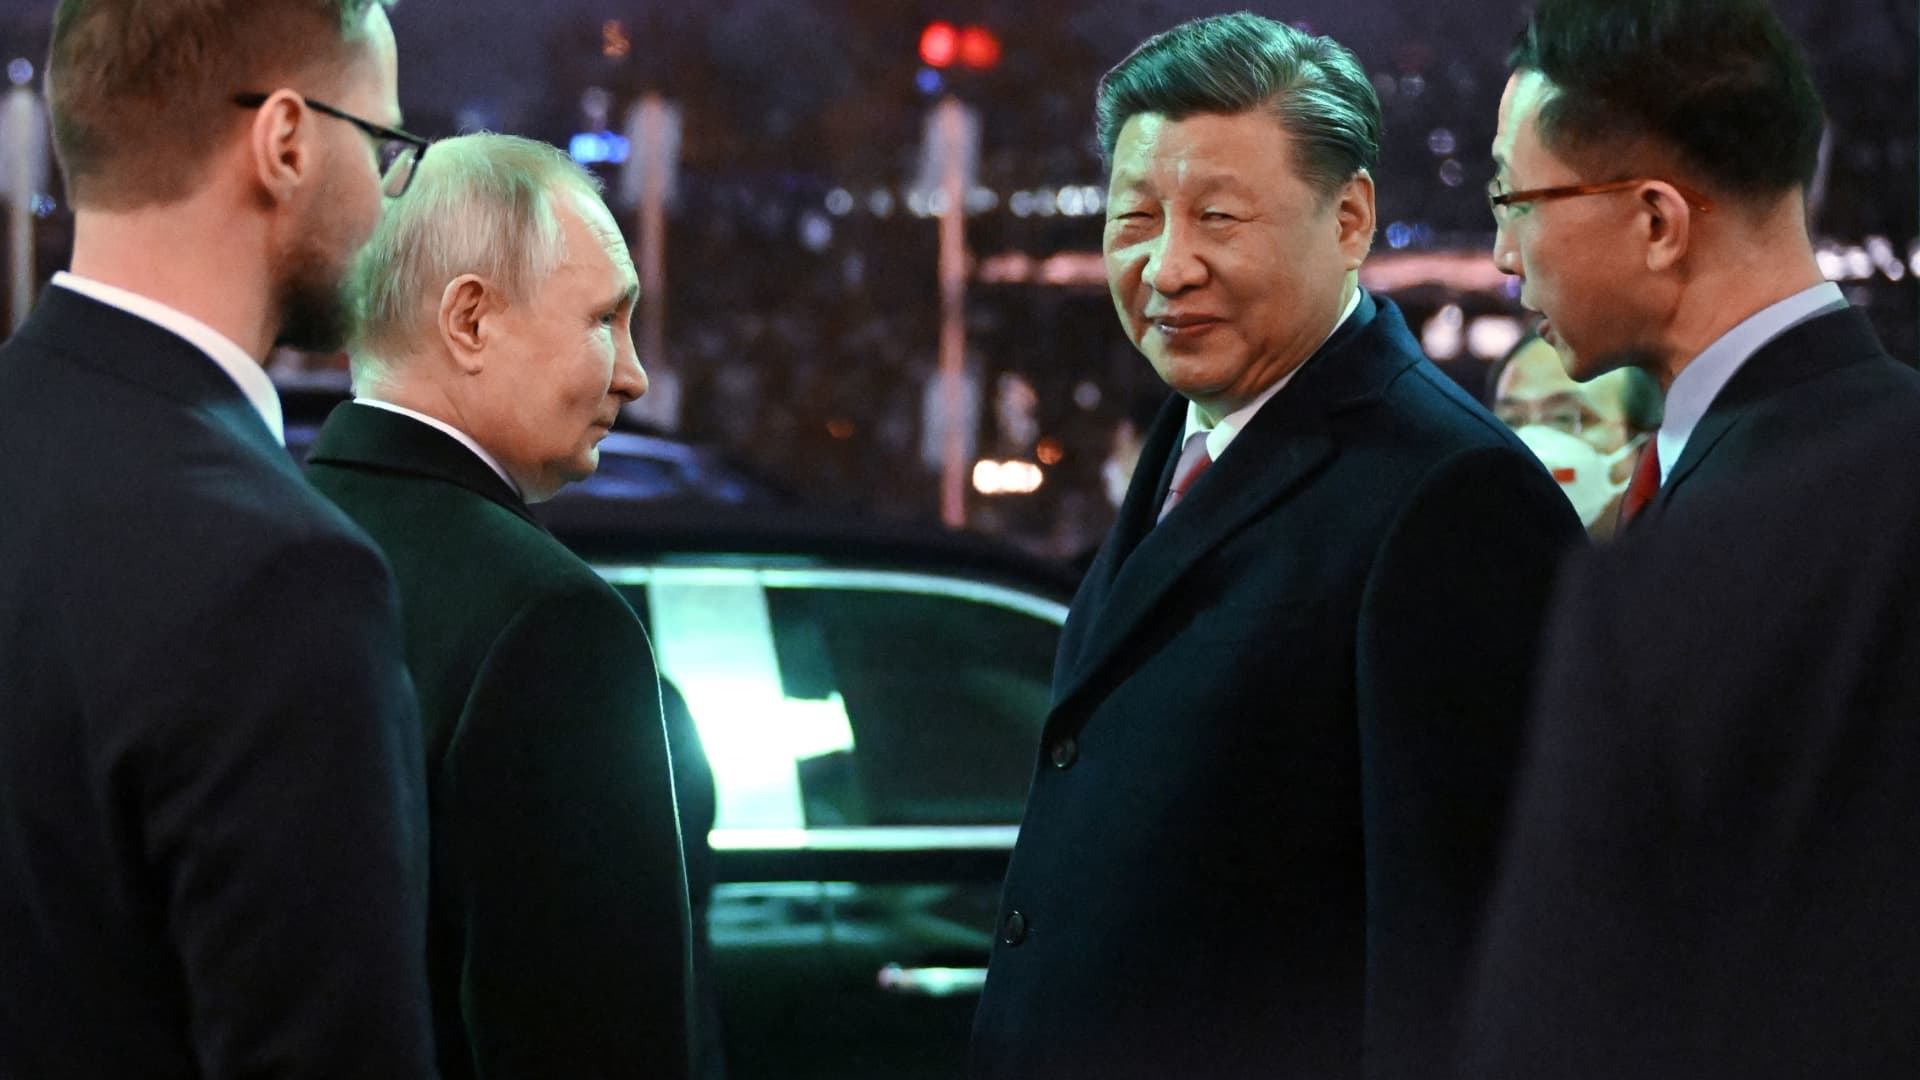 Russian President Vladimir Putin and Chinese President Xi Jinping leave after a reception in honor of the Chinese leader's visit to the Kremlin in Moscow on March 21, 2023.